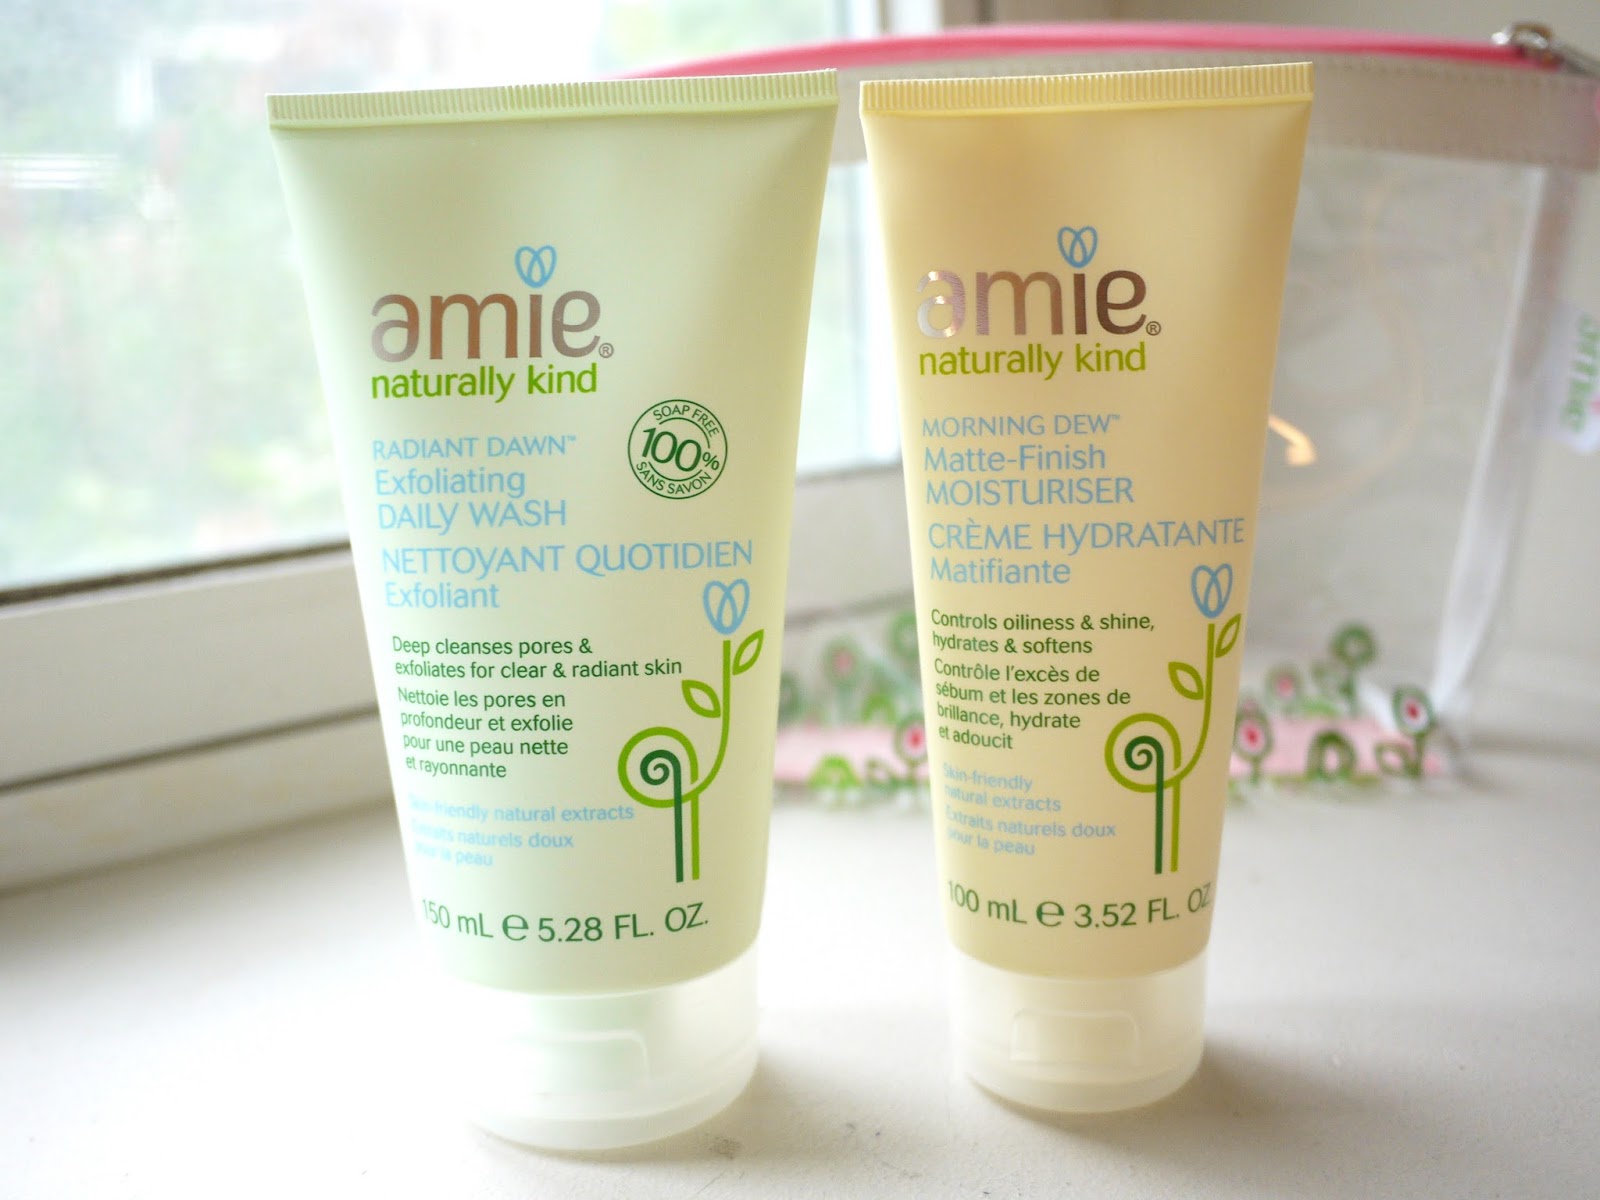 amie naturally kind skincare review exfoliating daily ash matte finihs moisturizer